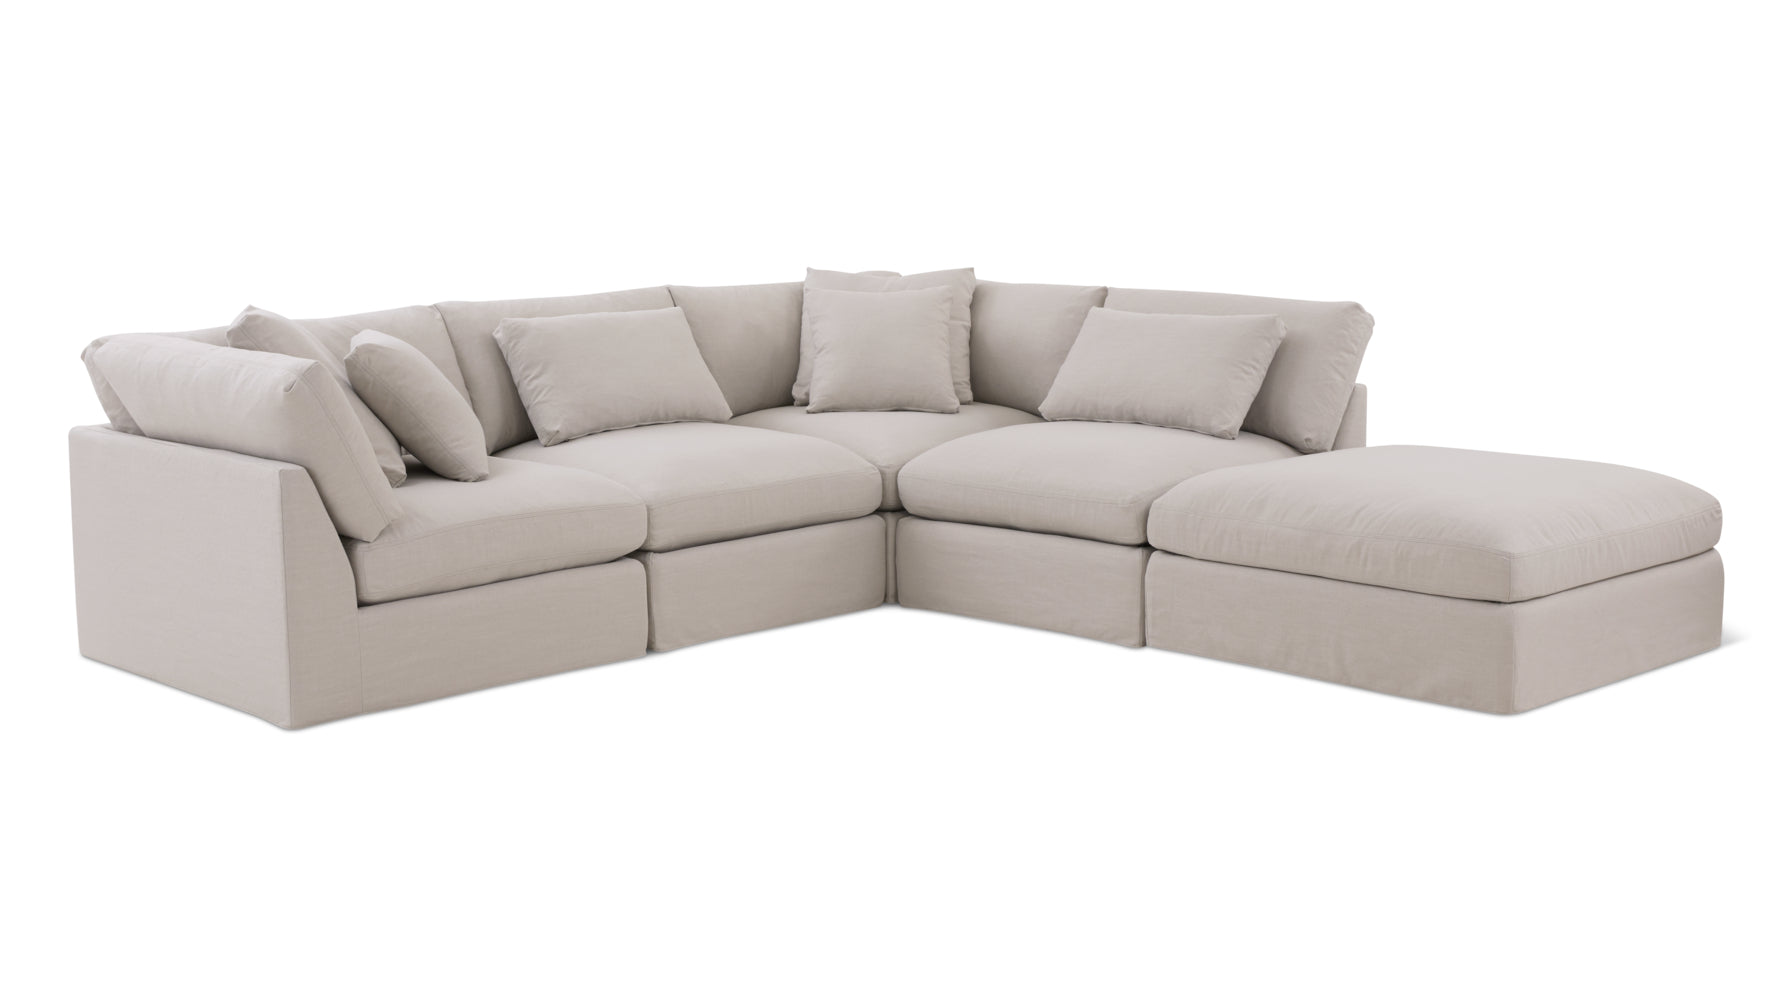 Get Together™ 5-Piece Modular Sectional, Large, Clay - Image 2